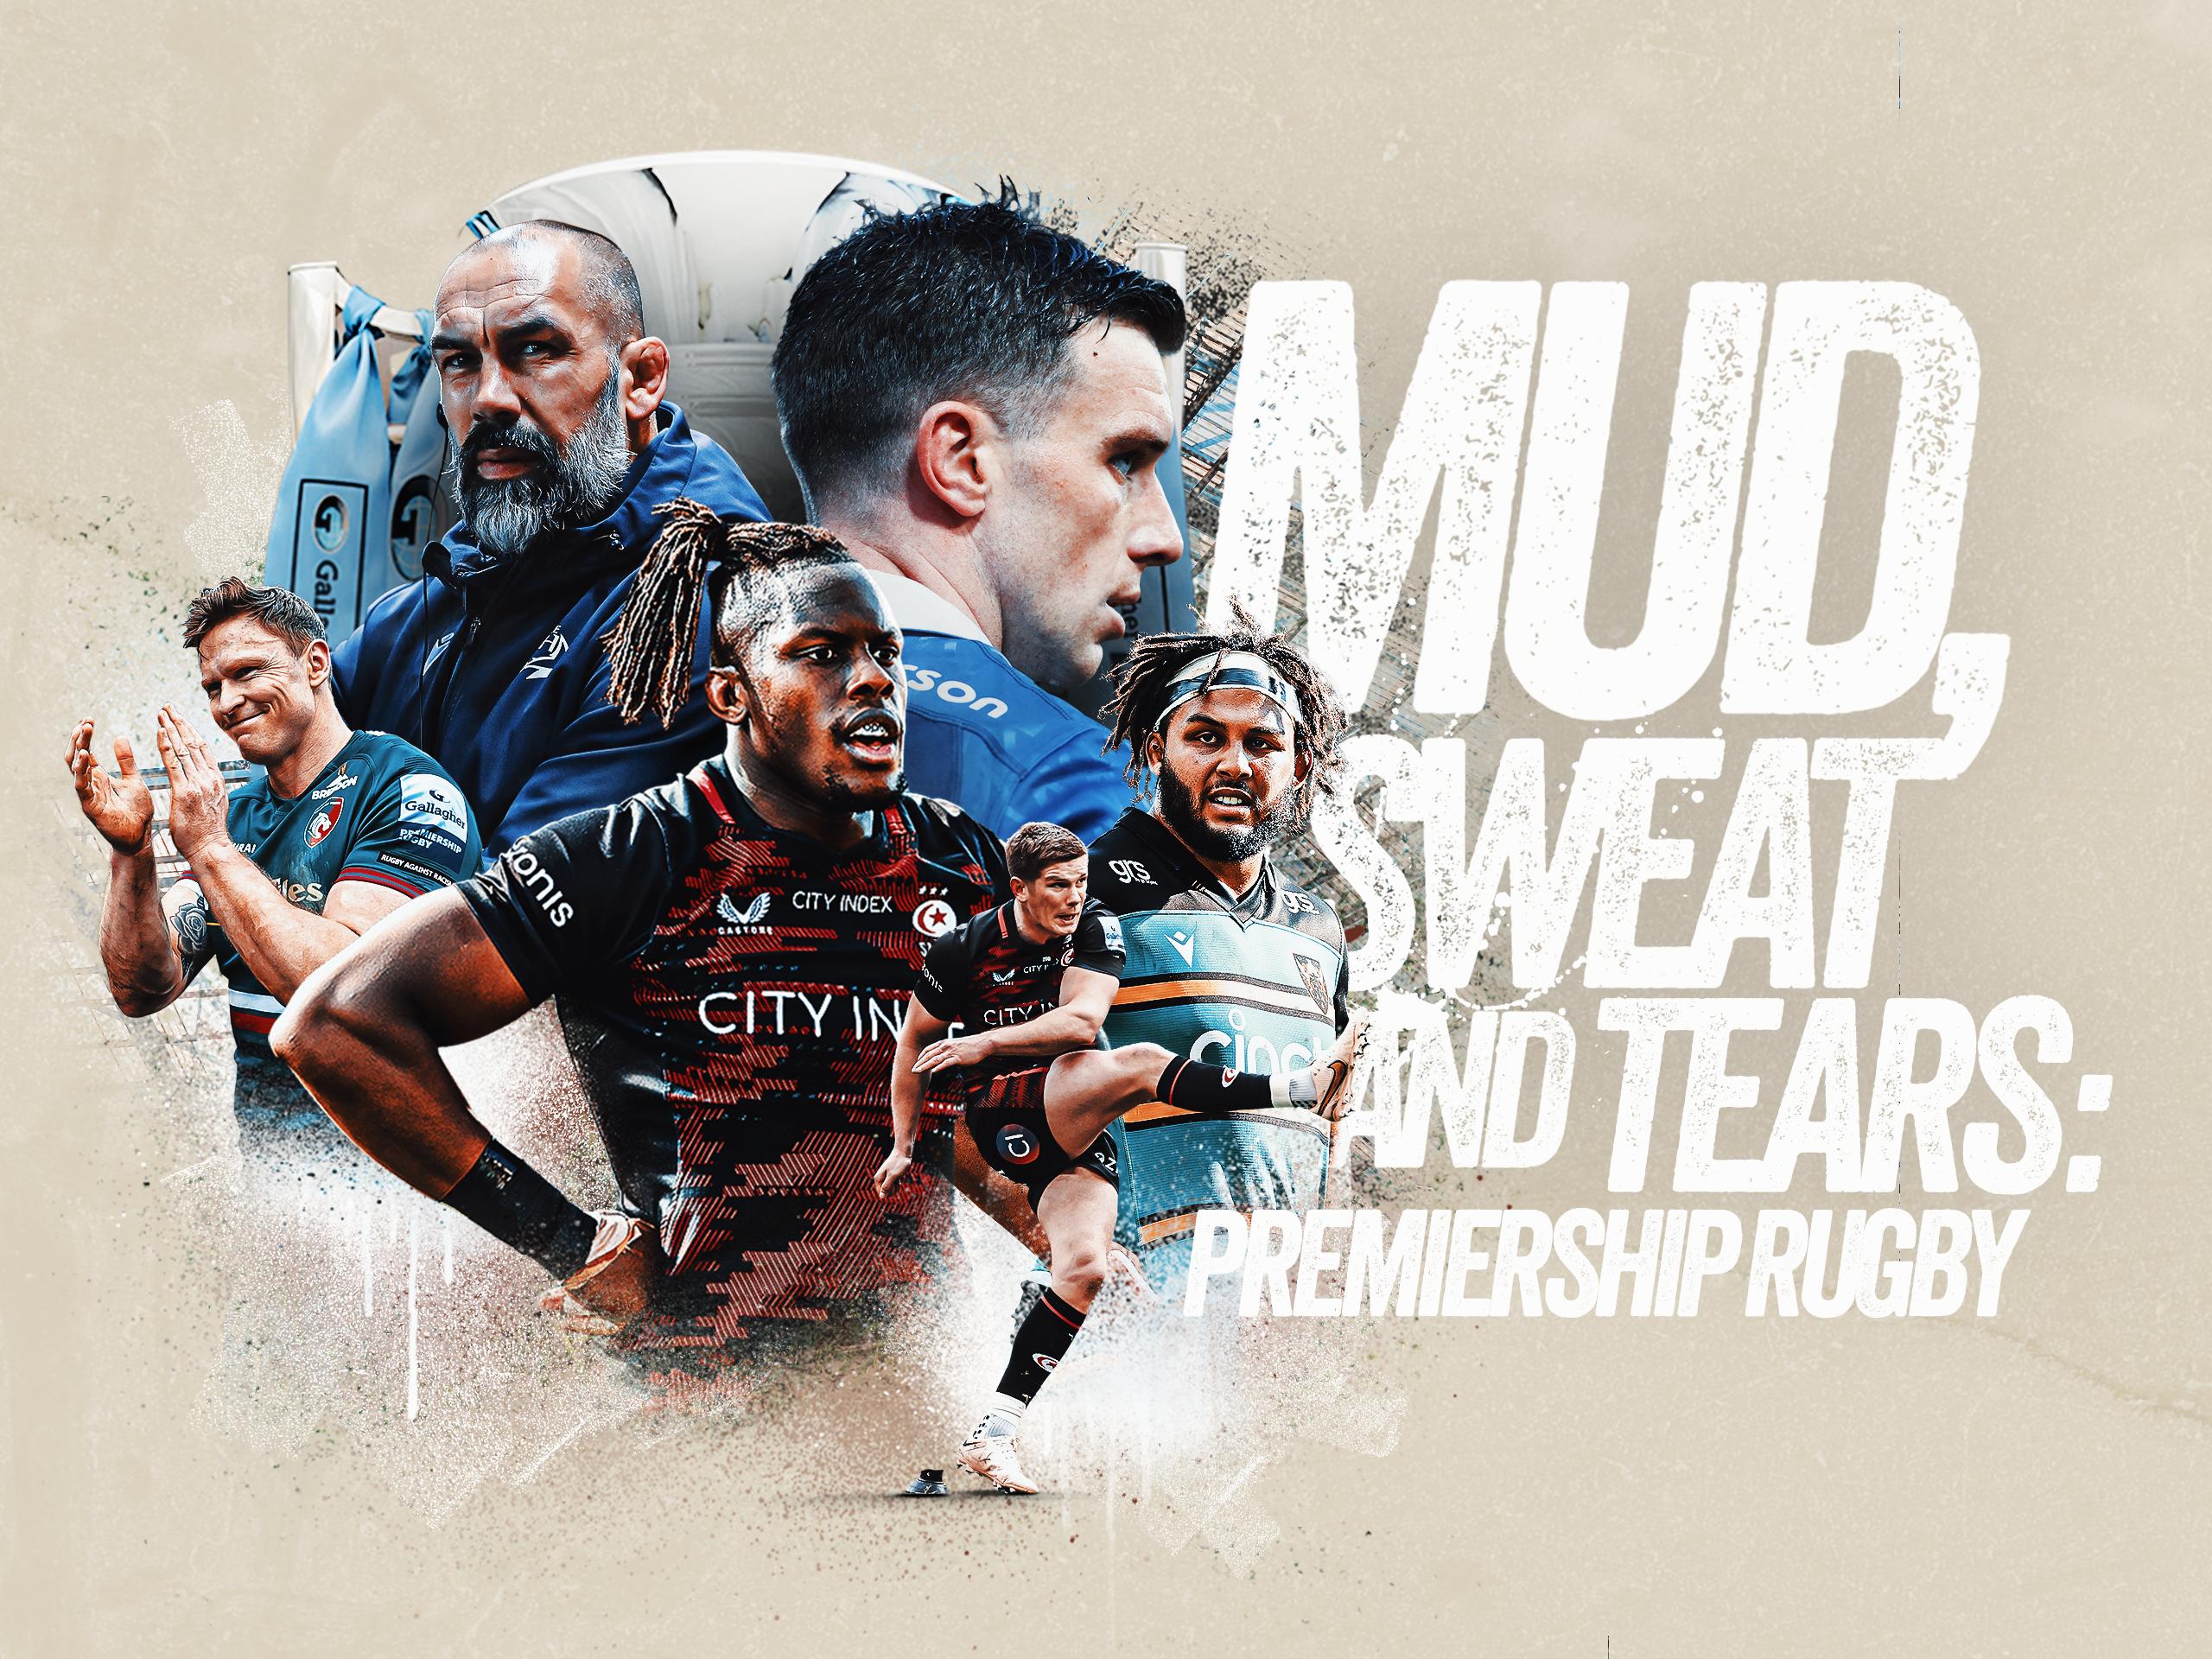 TV ratings for Mud, Sweat And Tears: Premiership Rugby in Ireland. Amazon Prime Video TV series